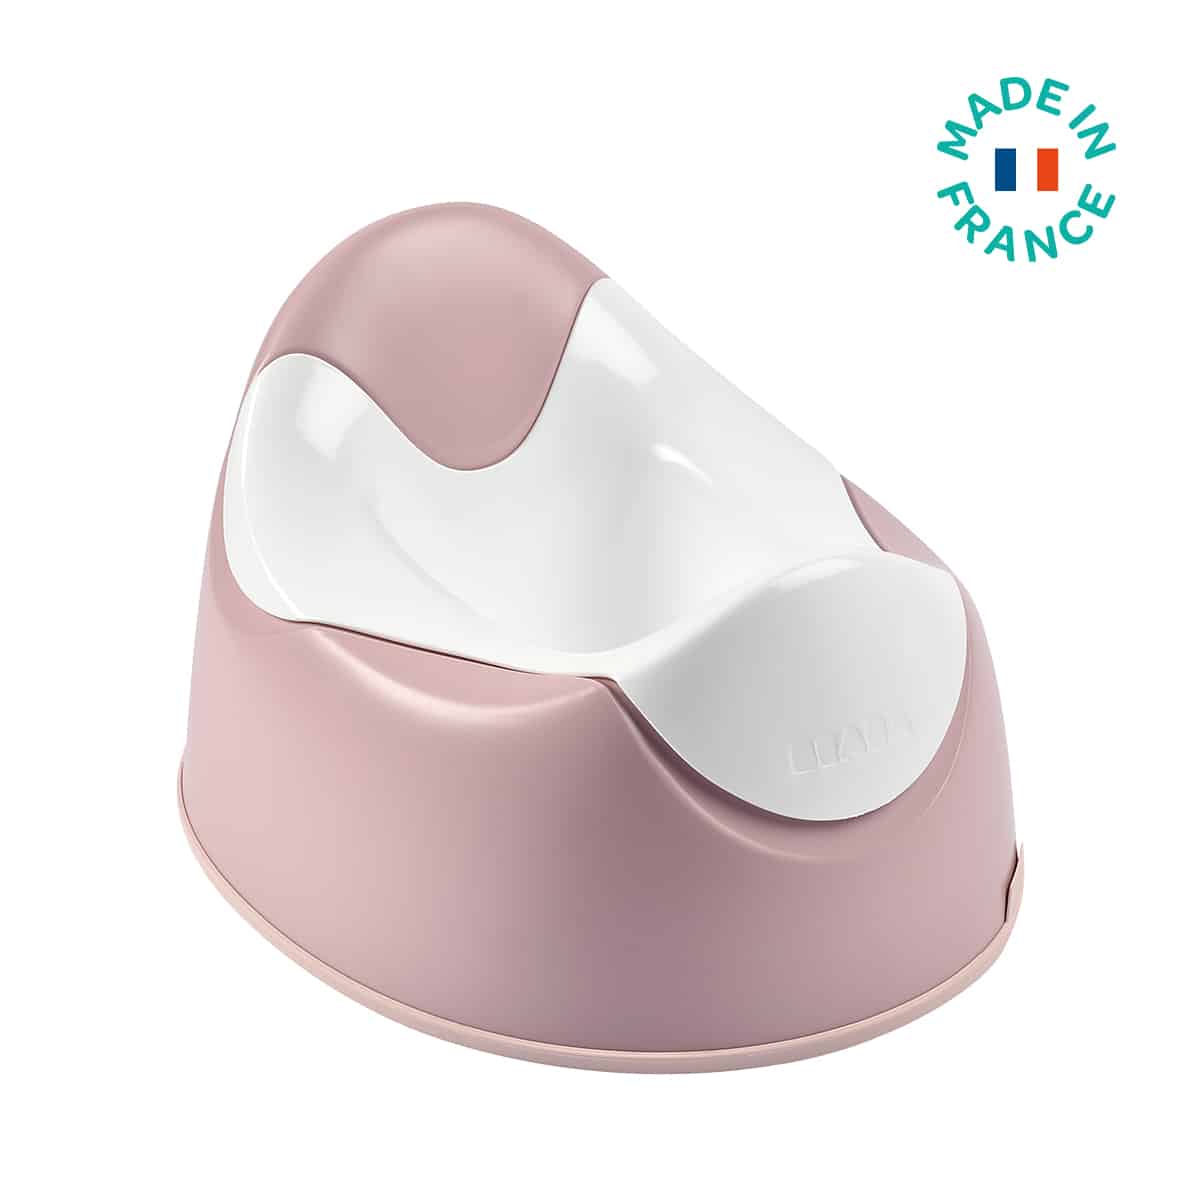 Beaba Ergonomic Potty in Rose with text that reads "Made in France"